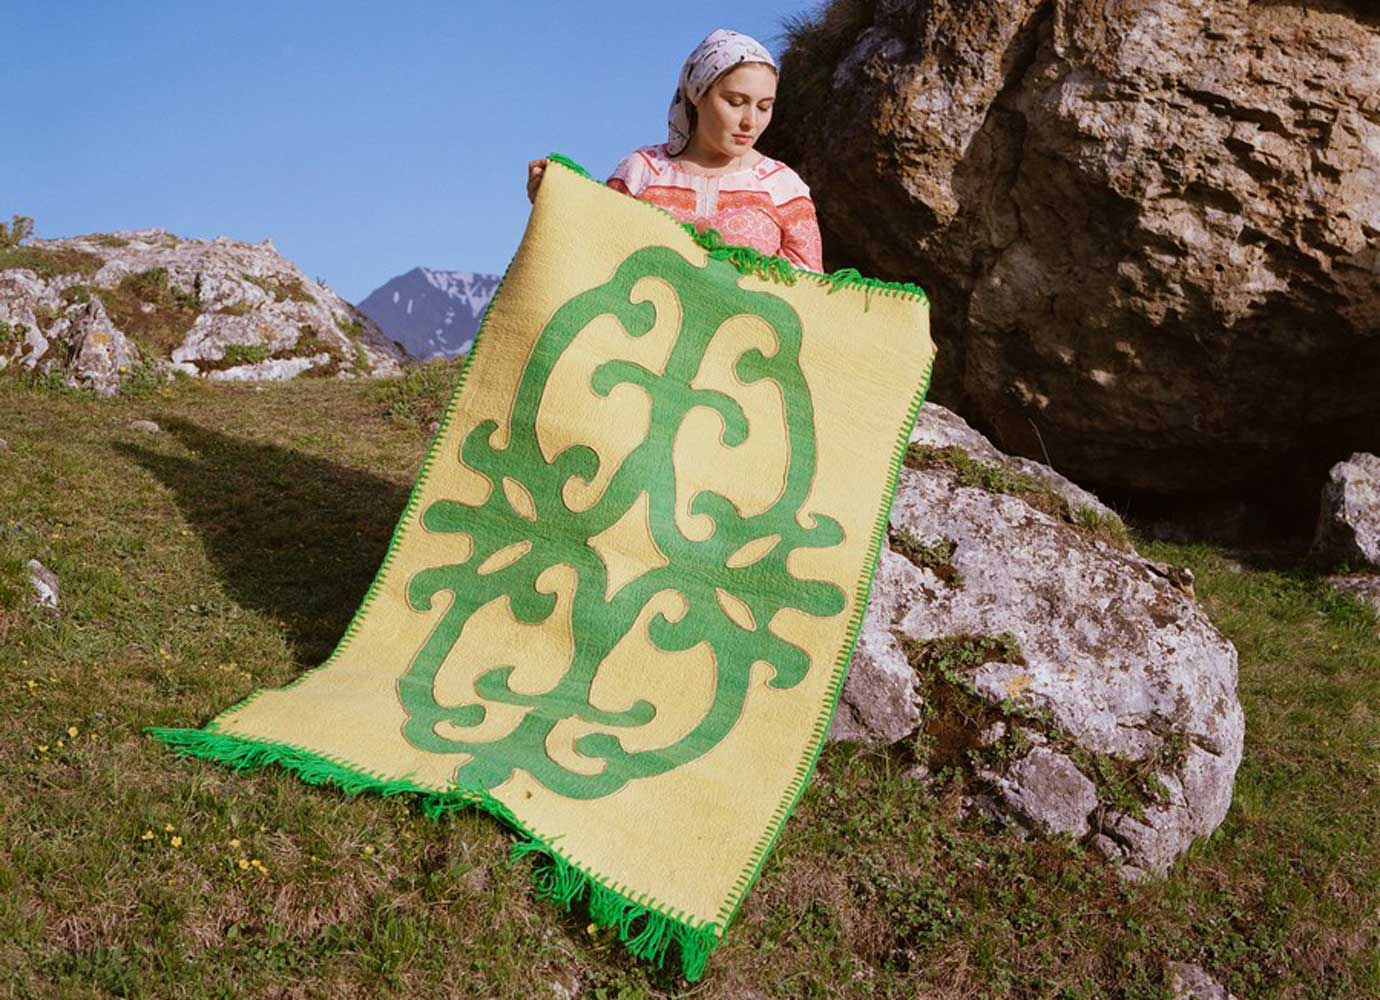 In Ingushetia, young women are reclaiming the threads of an ancient artform